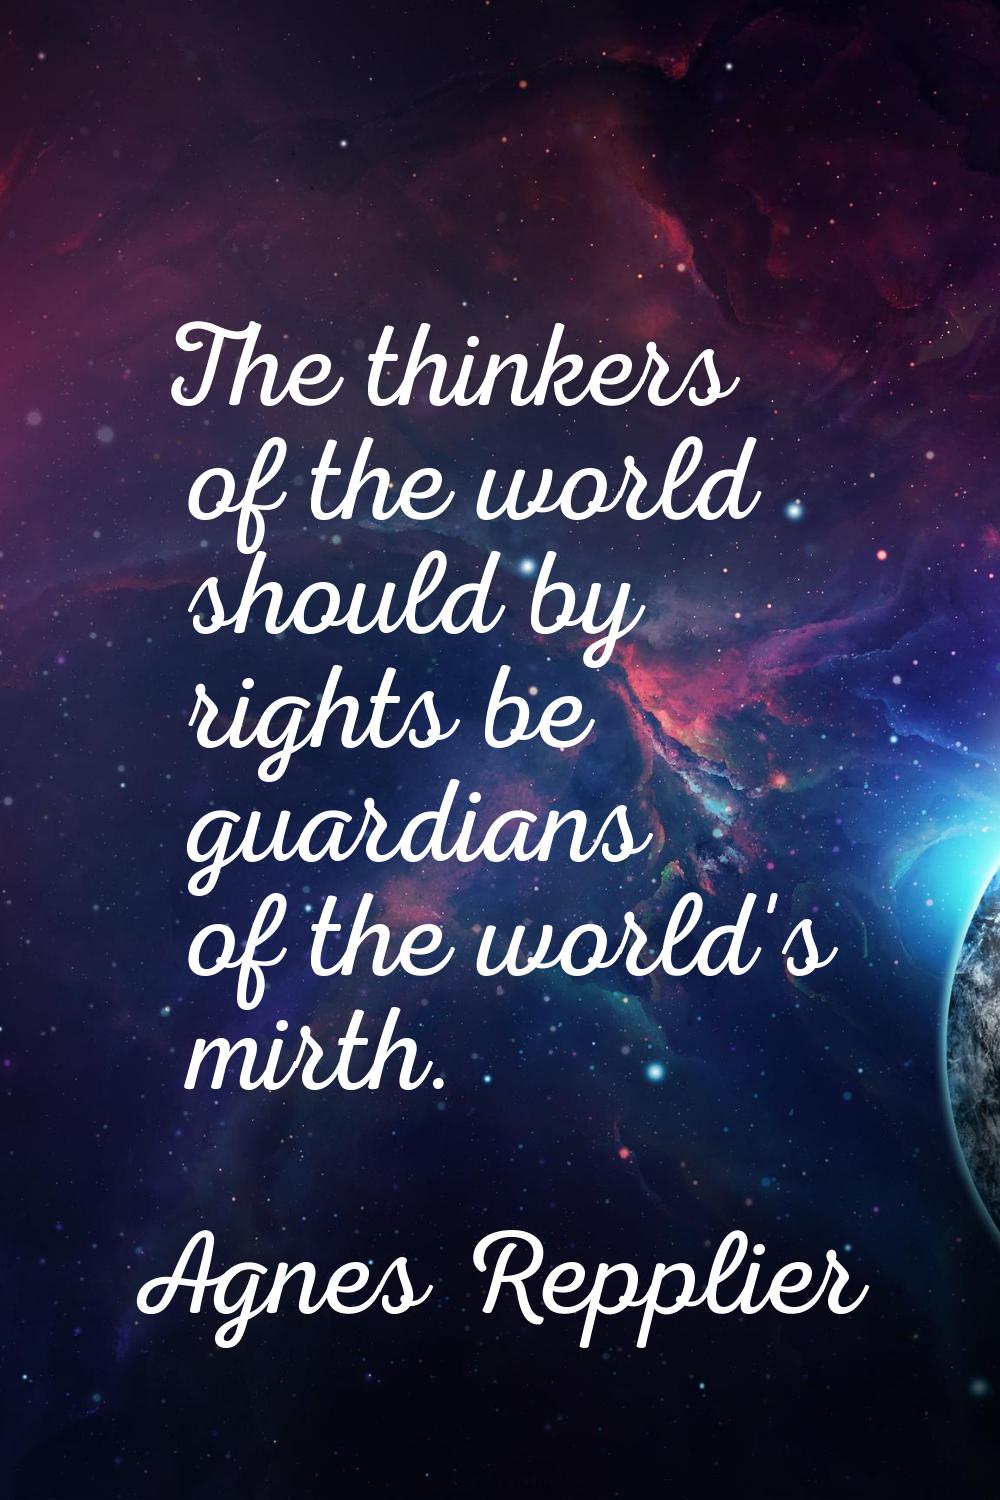 The thinkers of the world should by rights be guardians of the world's mirth.